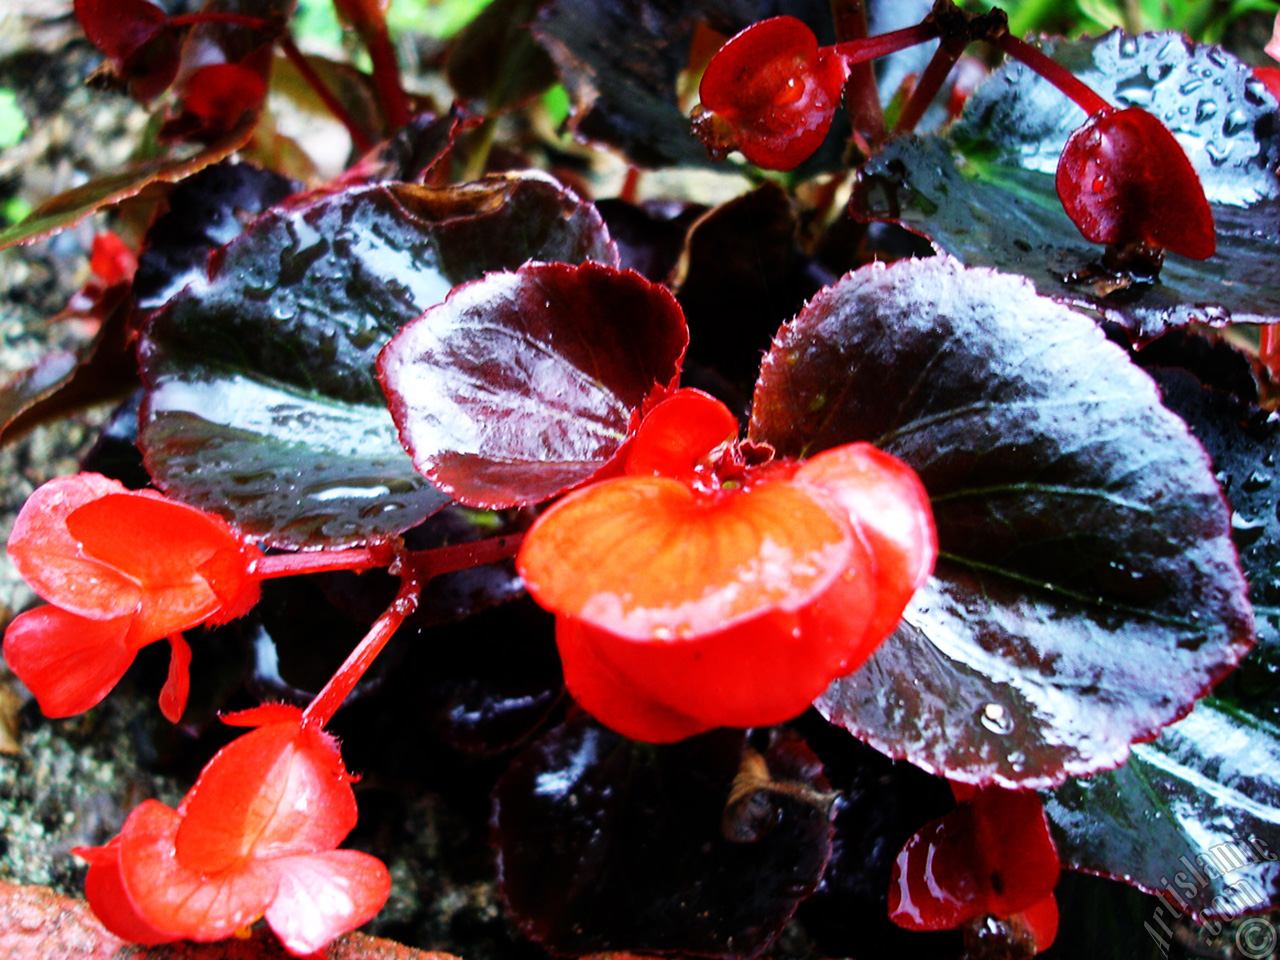 Wax Begonia -Bedding Begonia- with red flowers and brown leaves.
